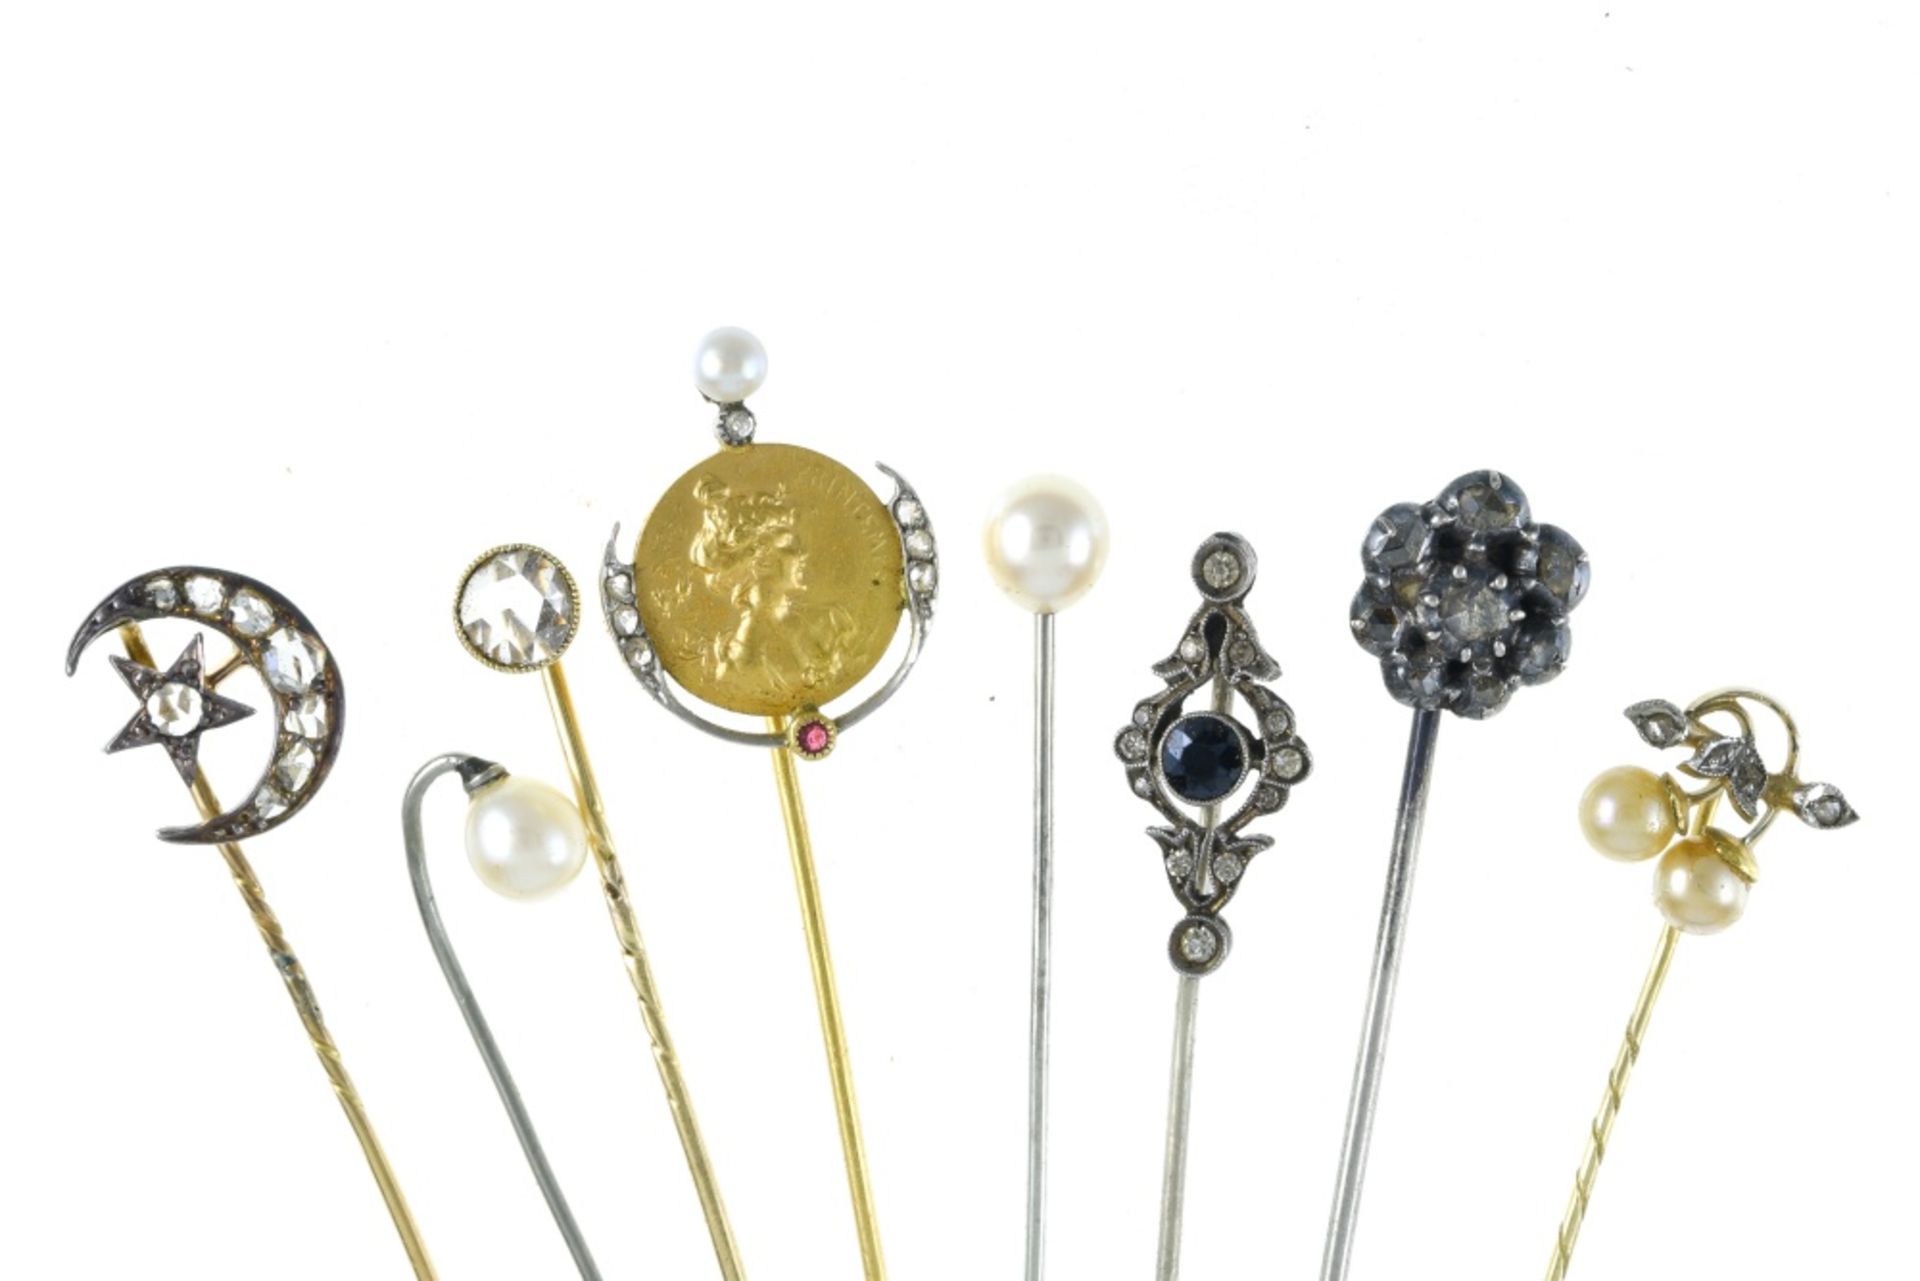 Set of eight tie pins Yellow gold and silver, rose-cut diamonds, pearls, and a "springtime"